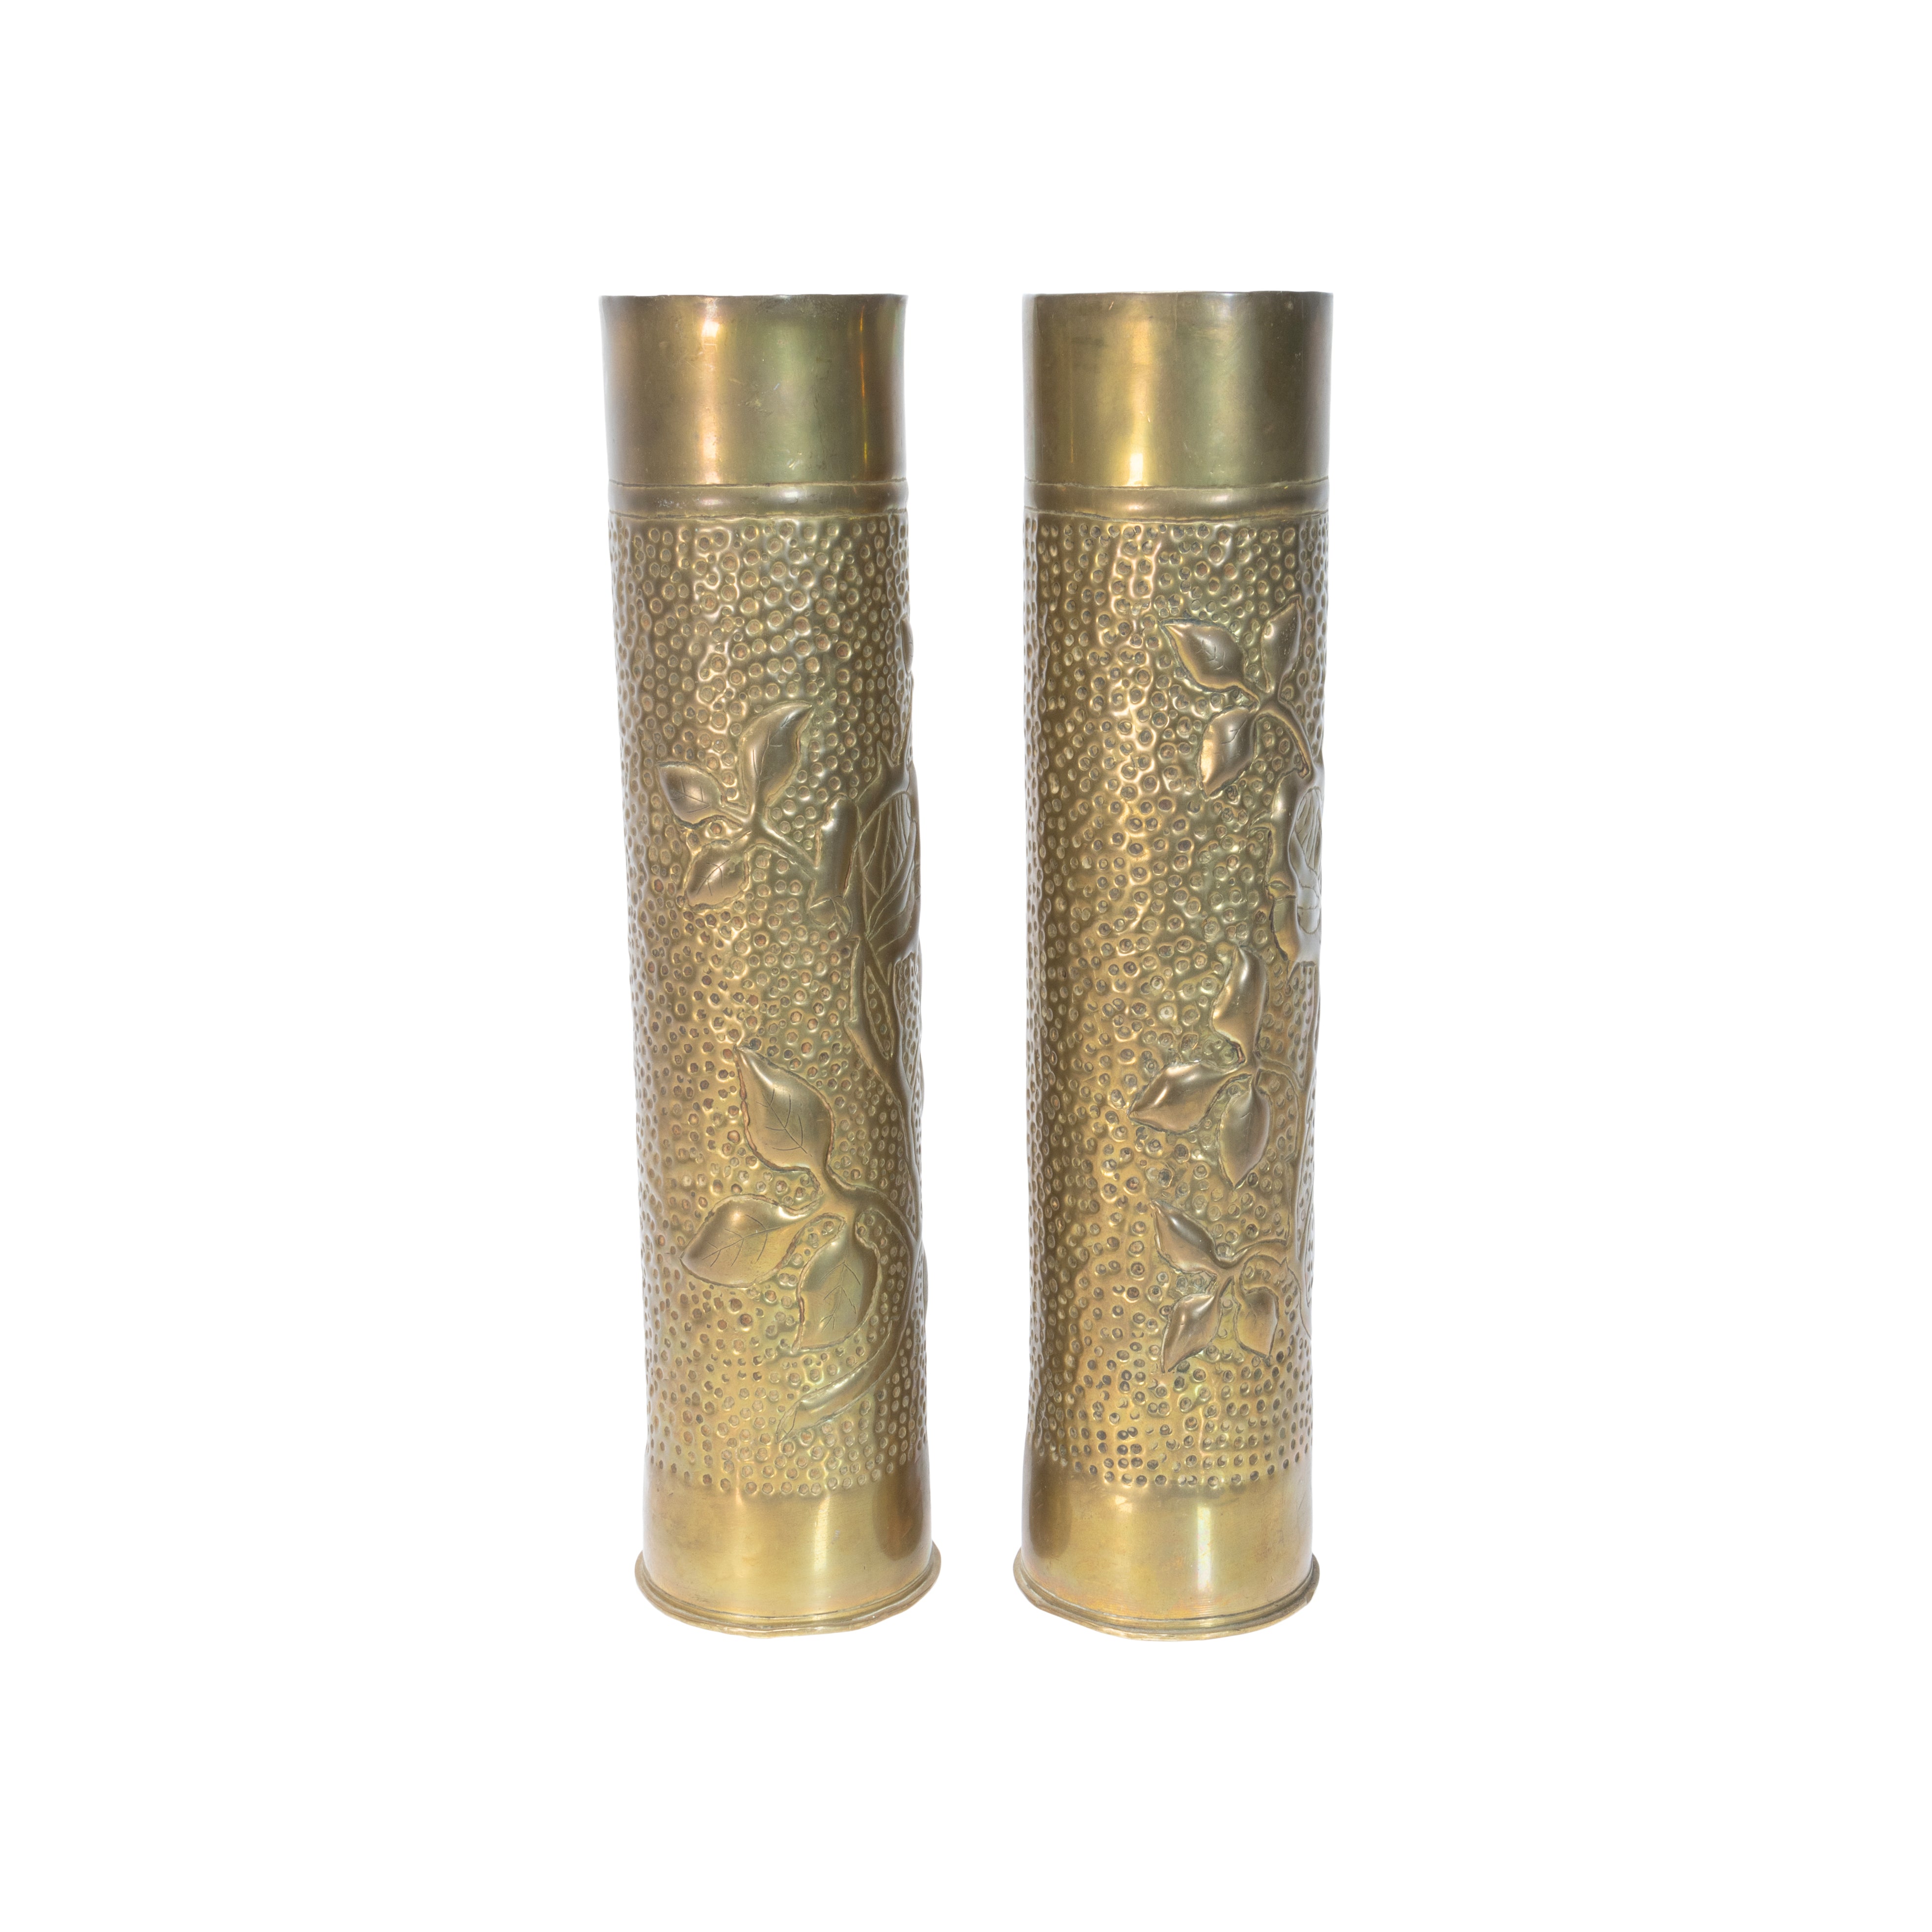 Pair of WWI Trench Art Vases